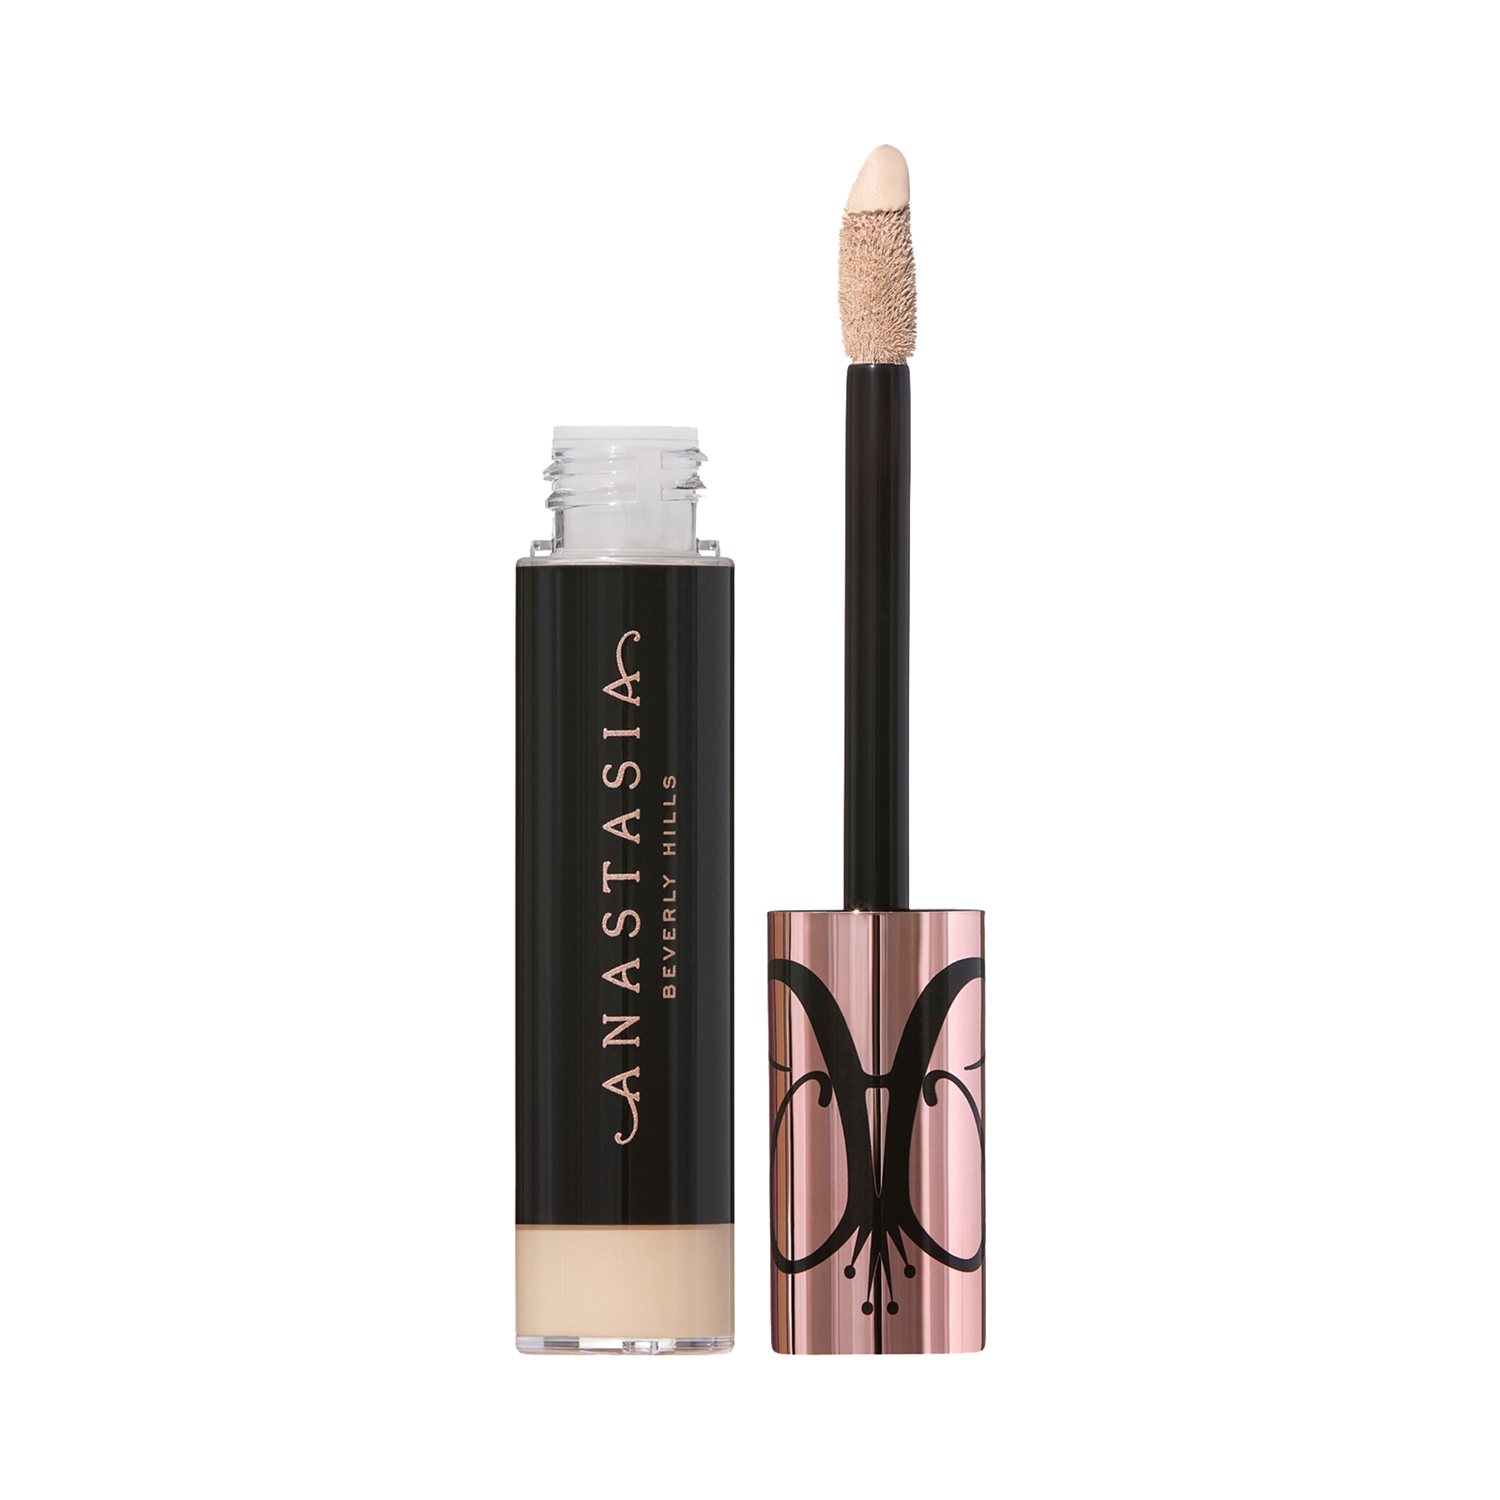 Anastasia Beverly Hills | Anastasia Beverly Hills Magic Touch Concealer - Shade 5 (12ml)